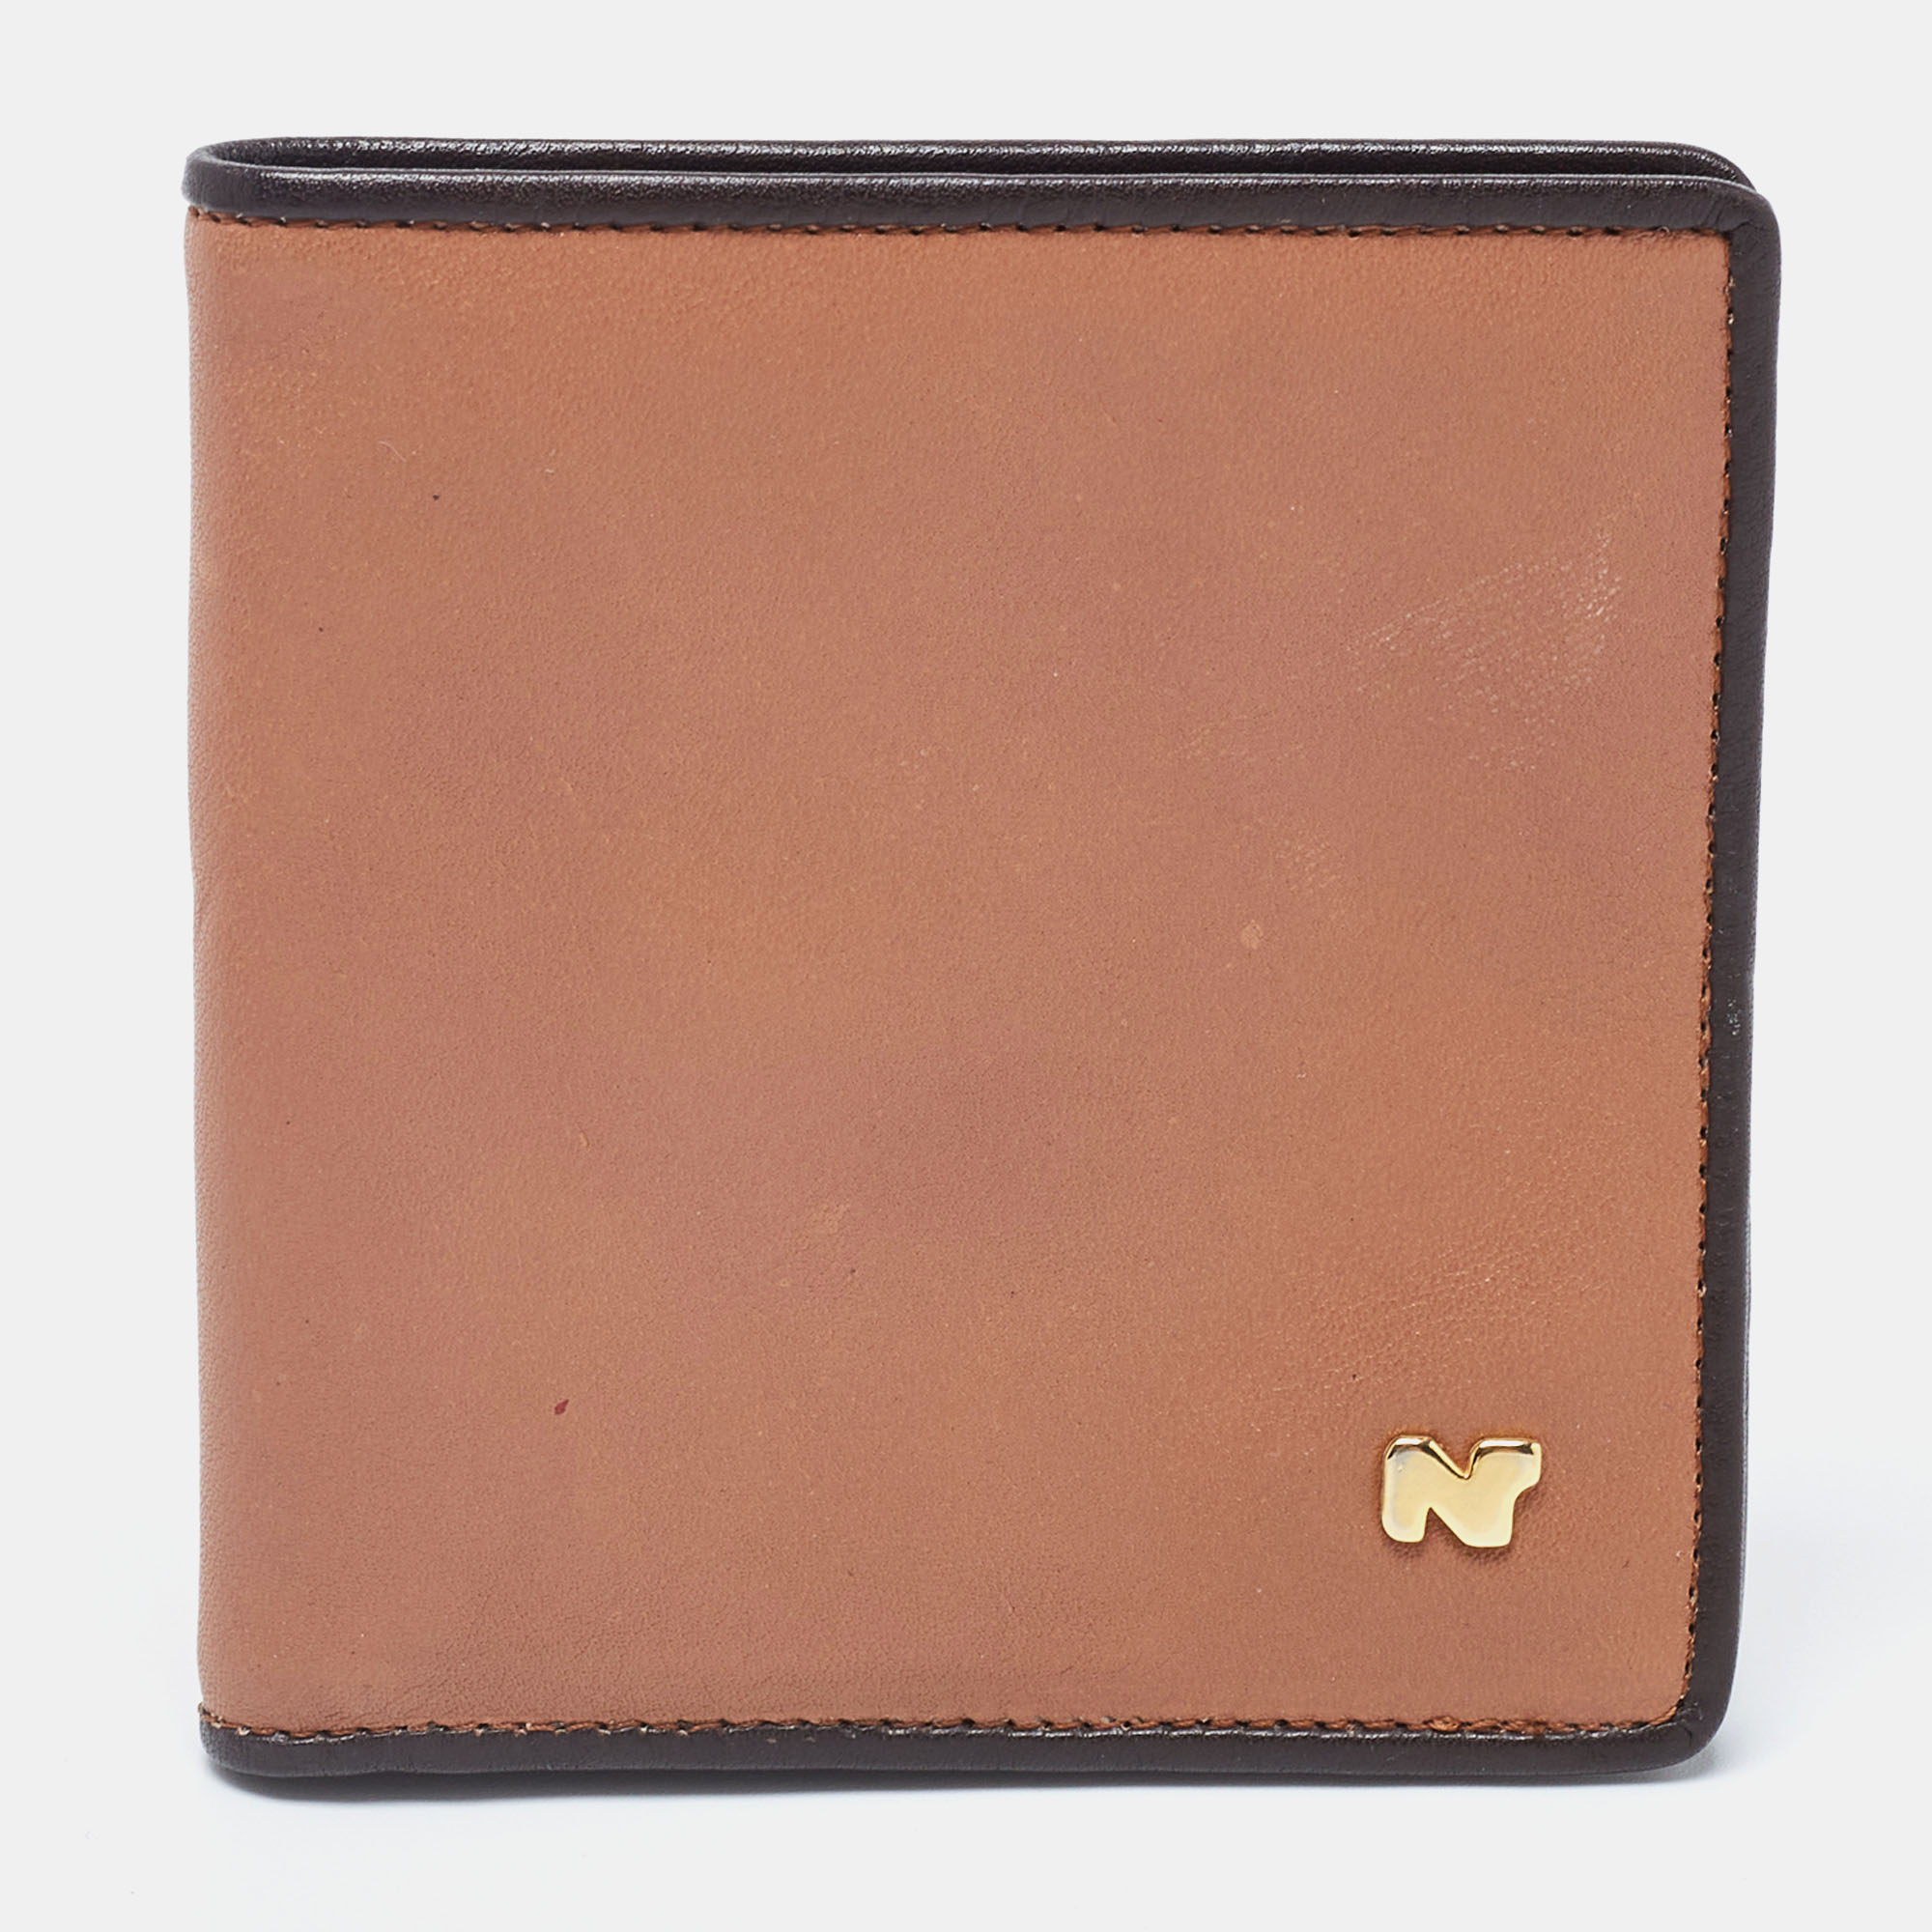 nina ricci two tone brown leather bifold compact wallet